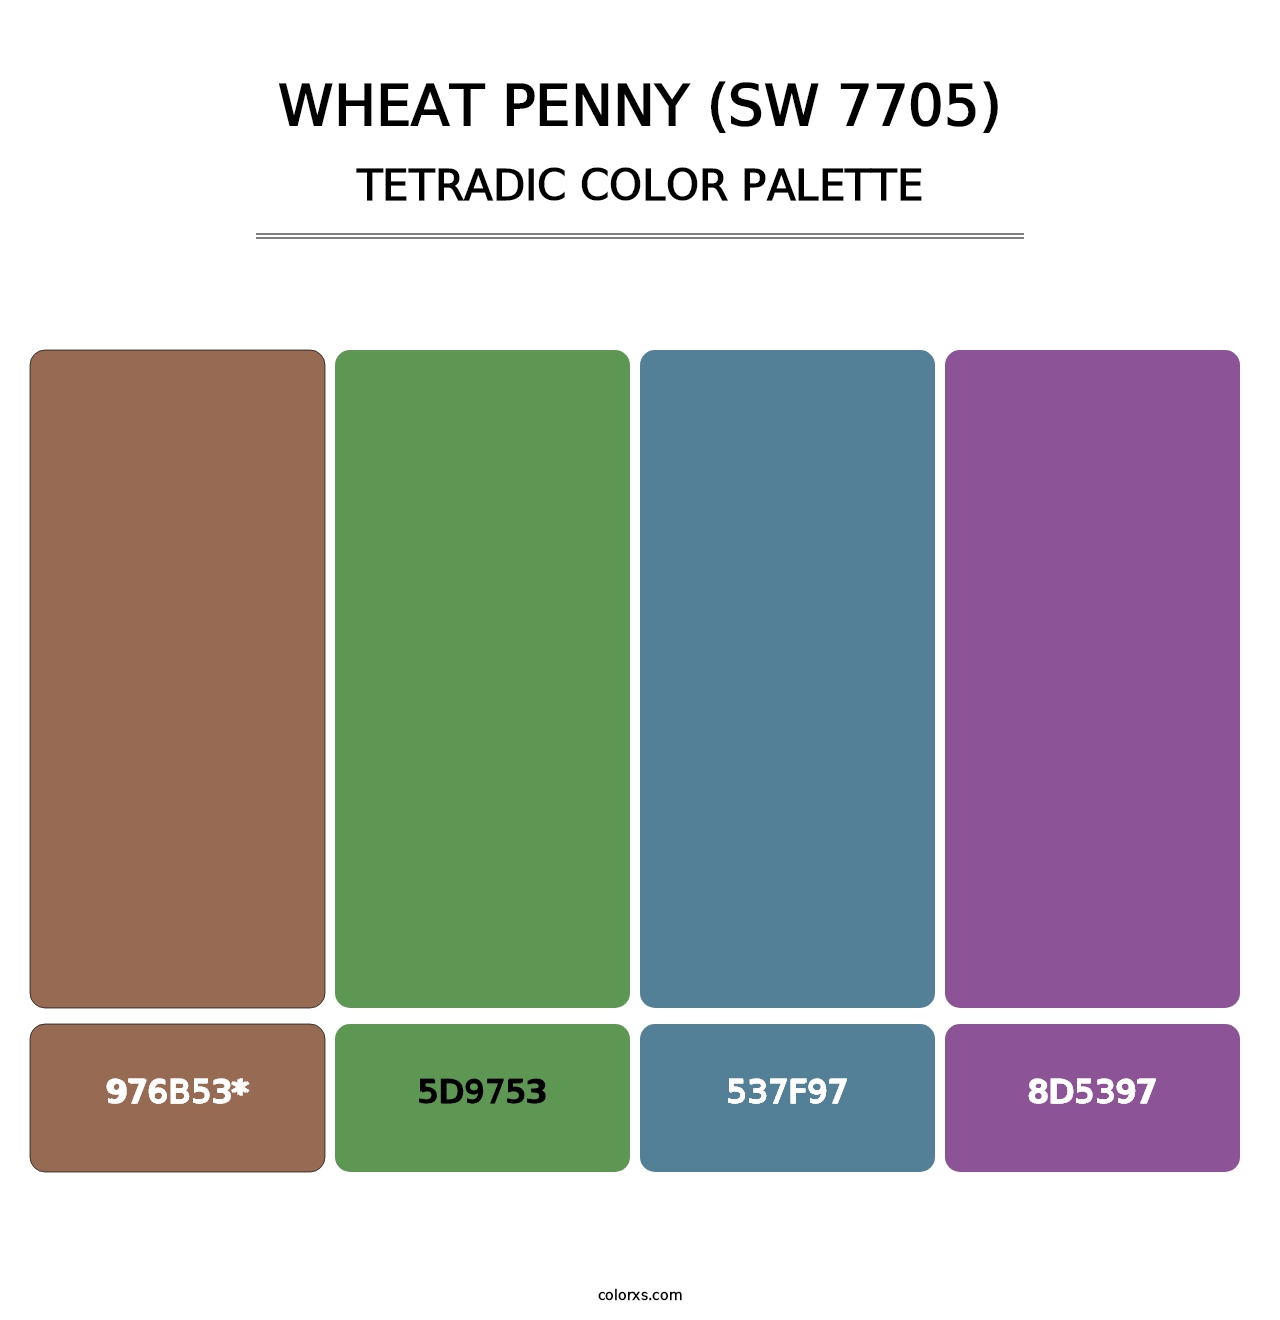 Wheat Penny (SW 7705) - Tetradic Color Palette